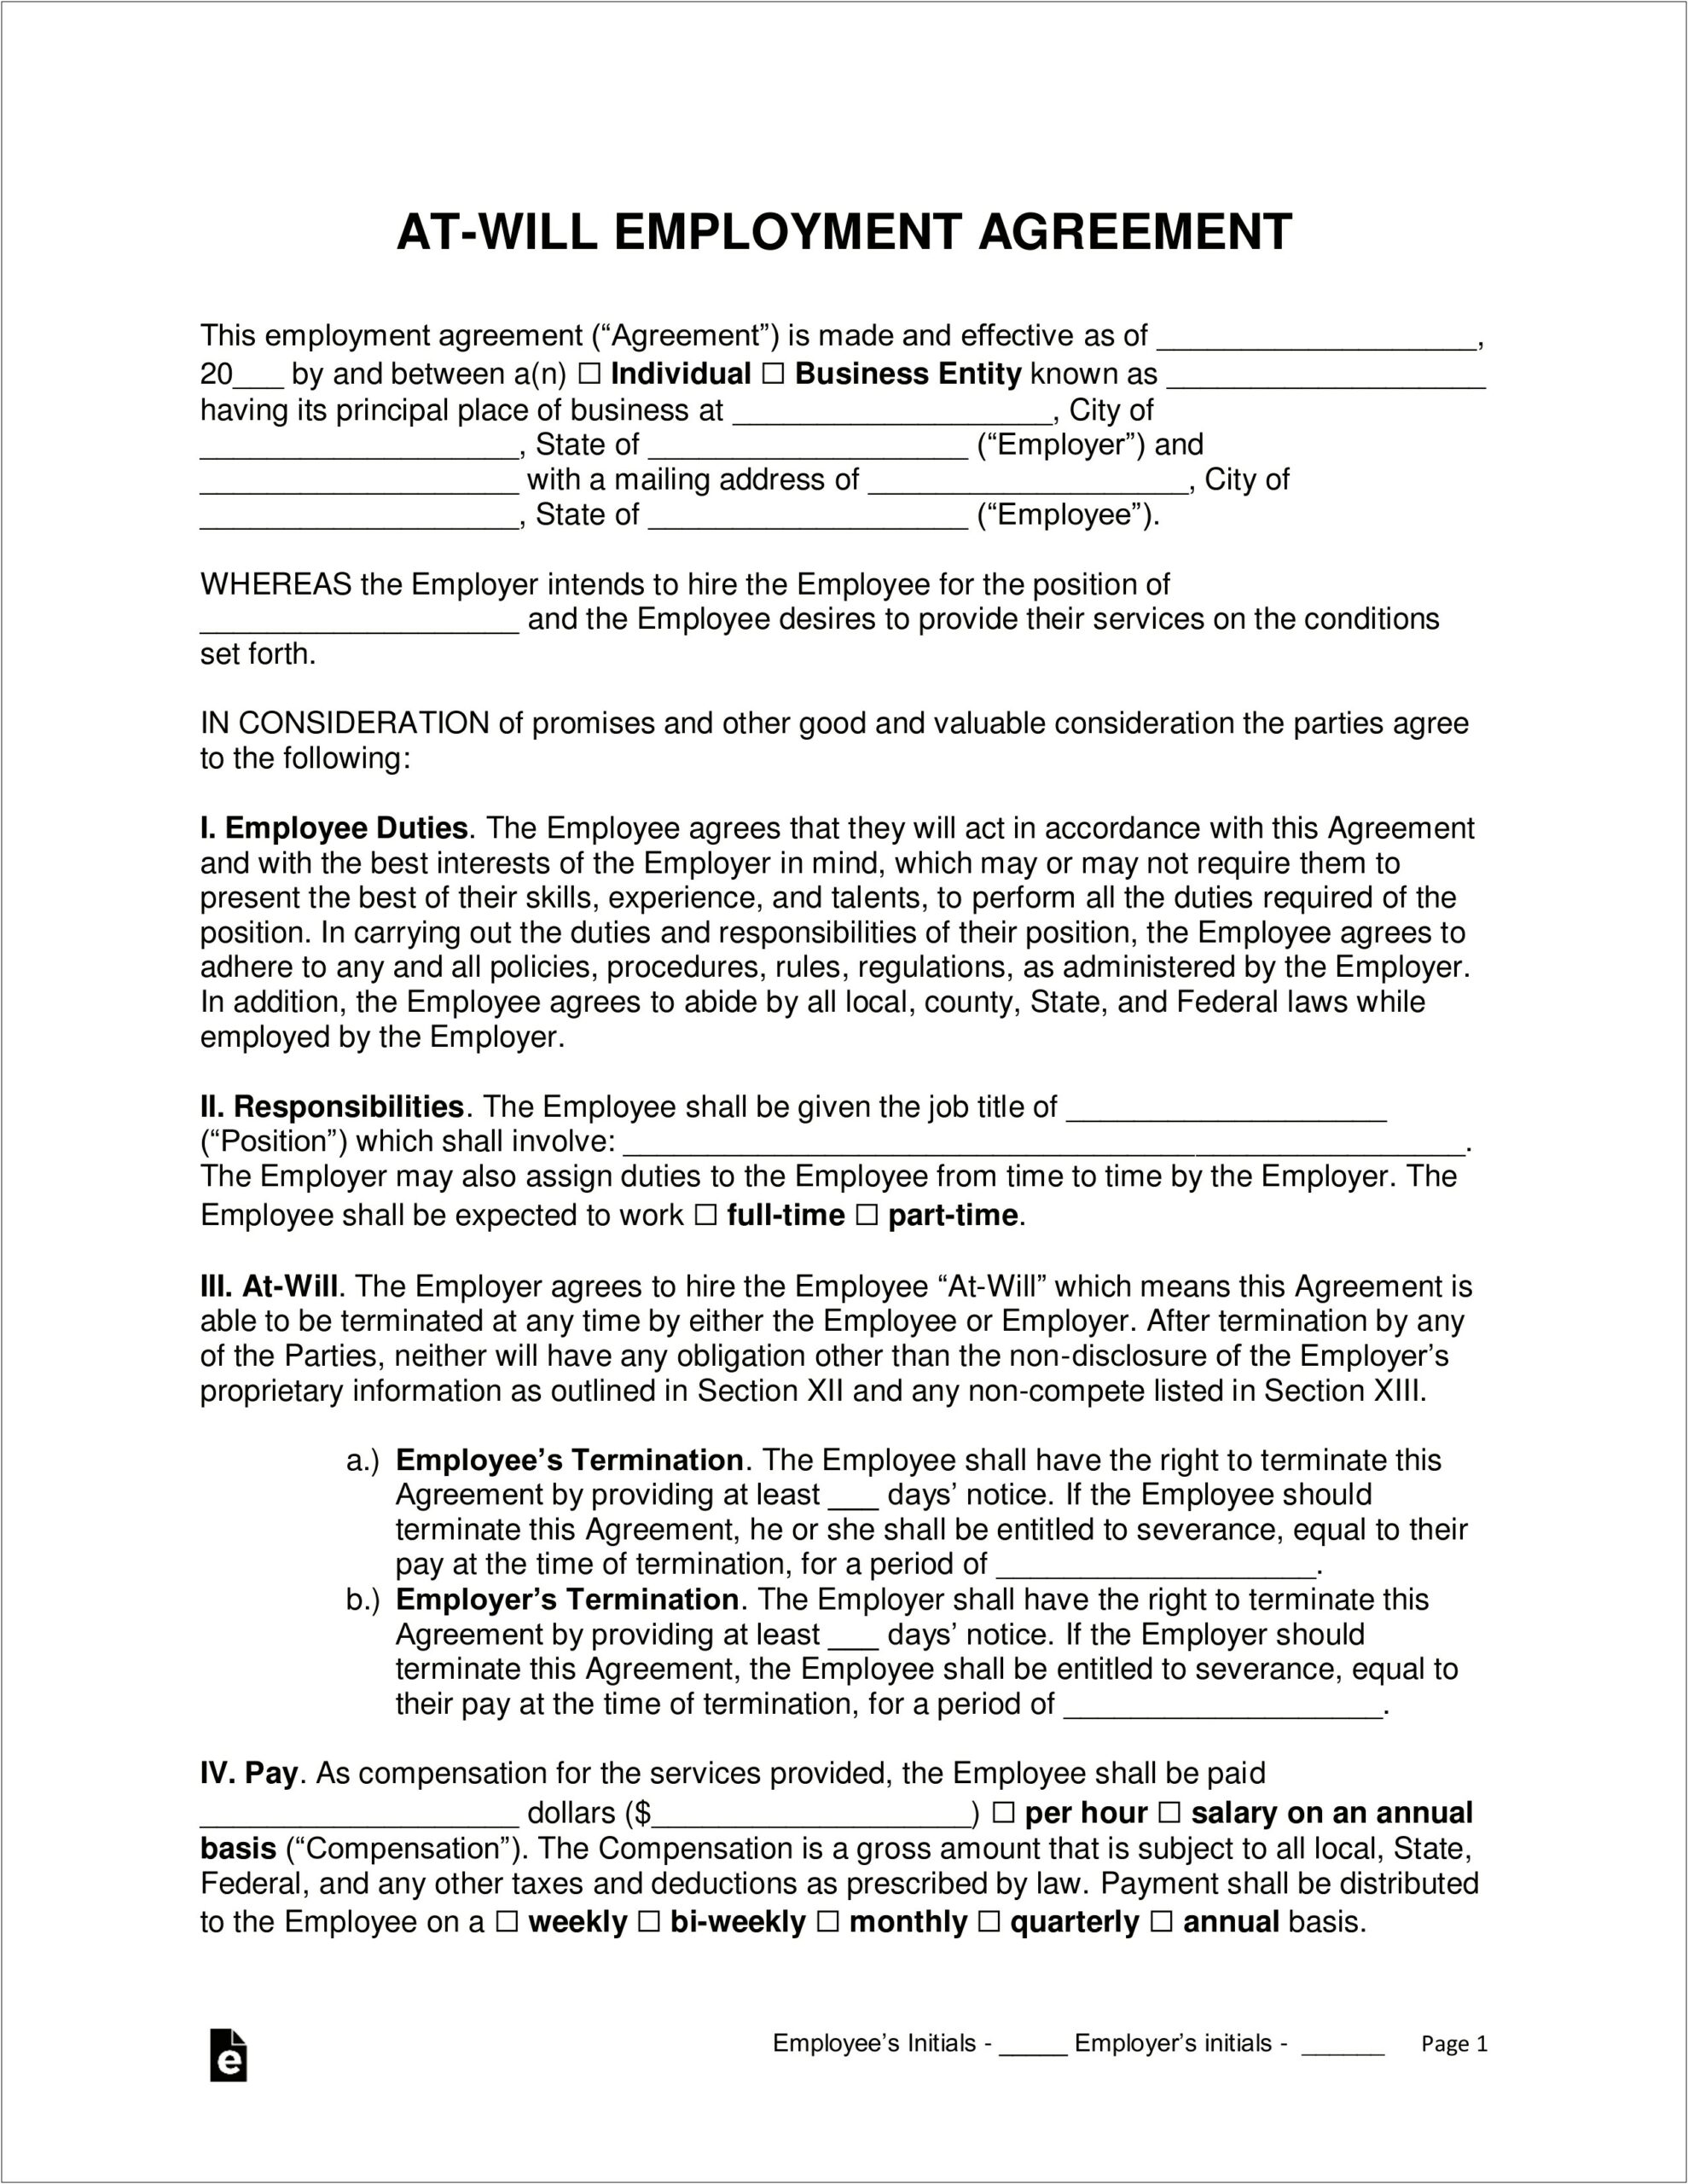 Work For Hire Statement Clause Free Template